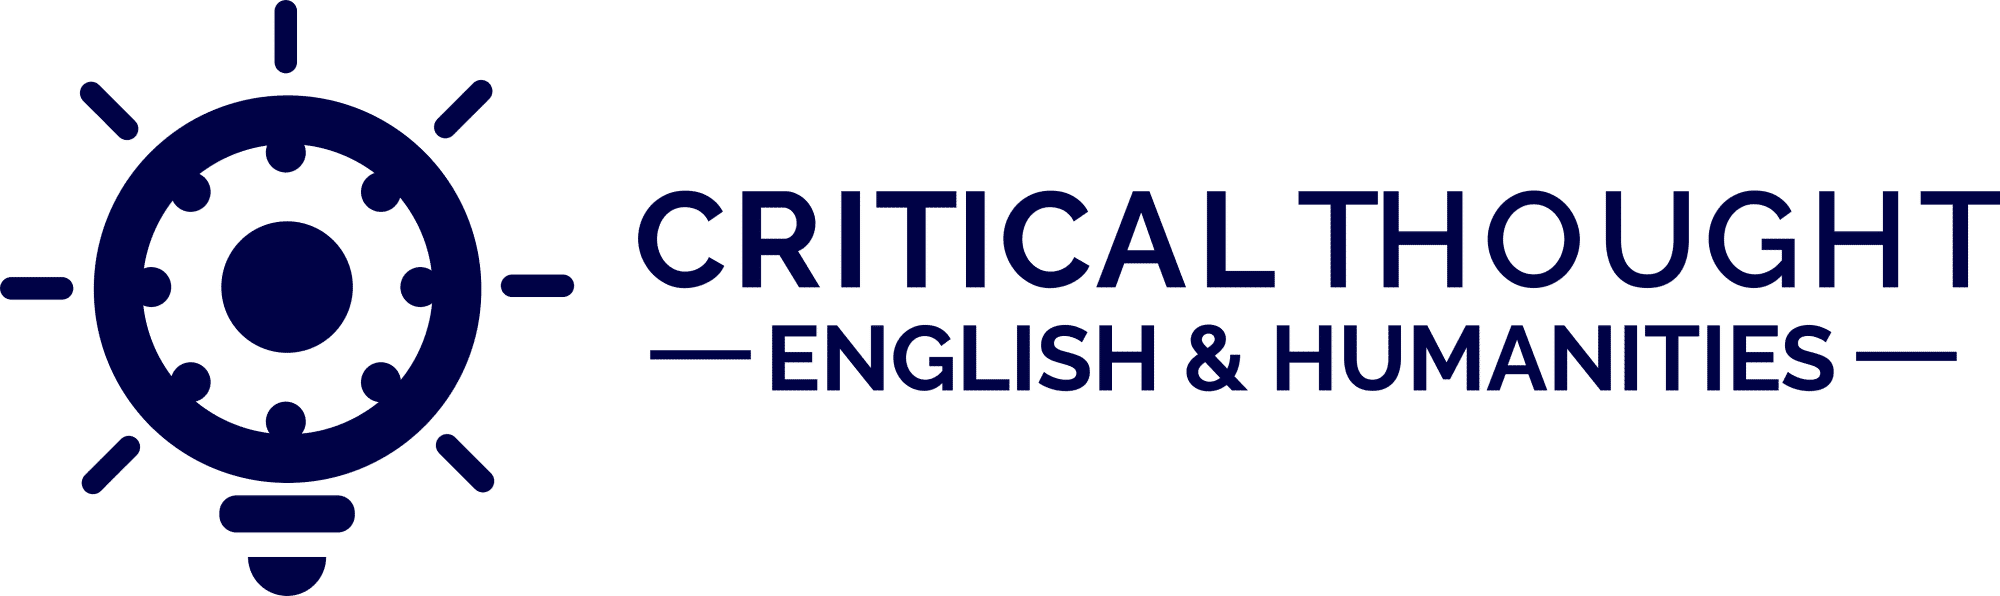 Critical Thought English and Humanities